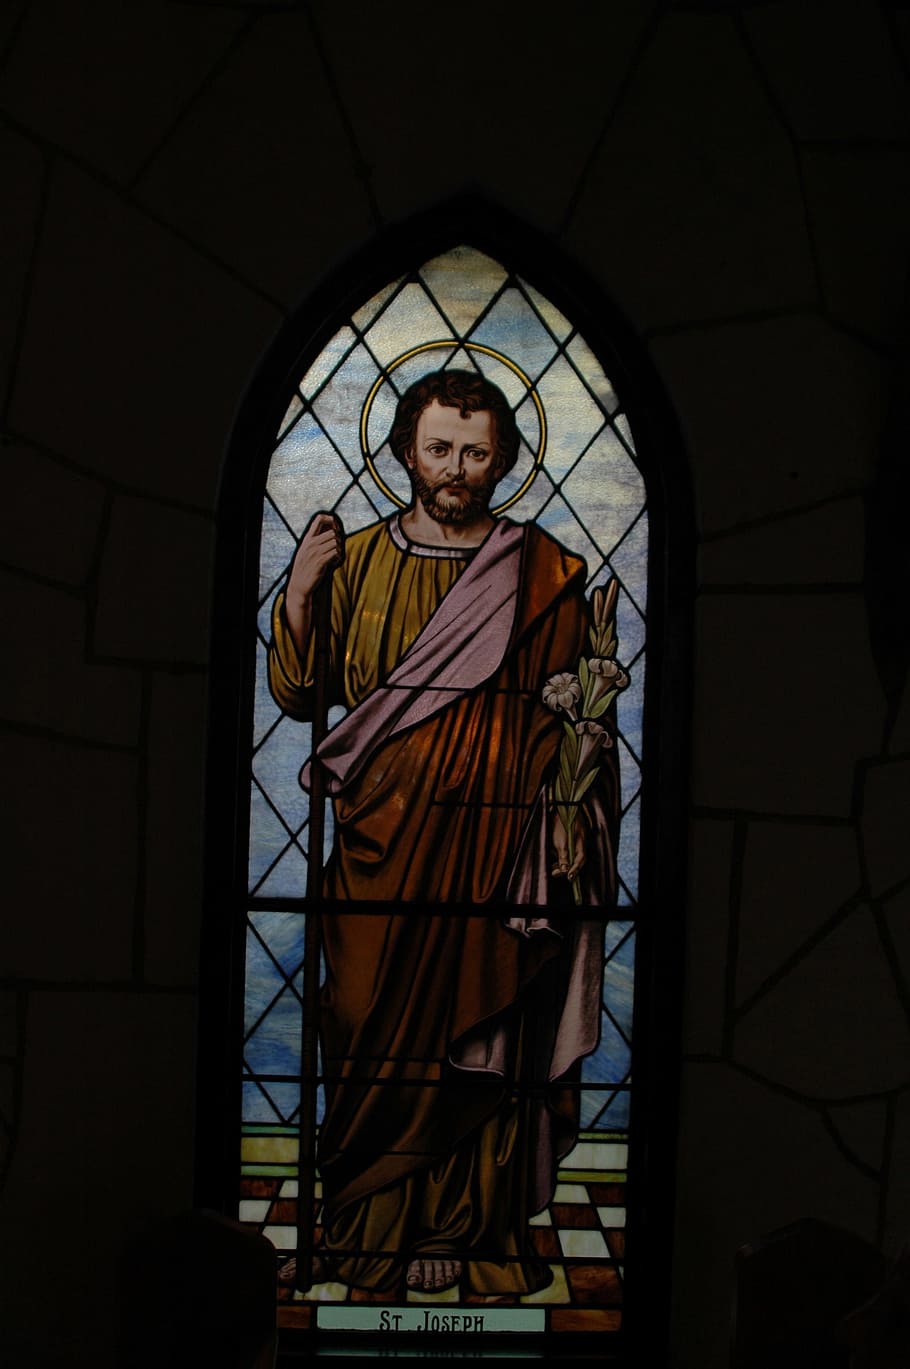 Stained-Glass, Stained Glass, St Joseph, saint joseph, church window, church, window, religion, christianity, colored glass